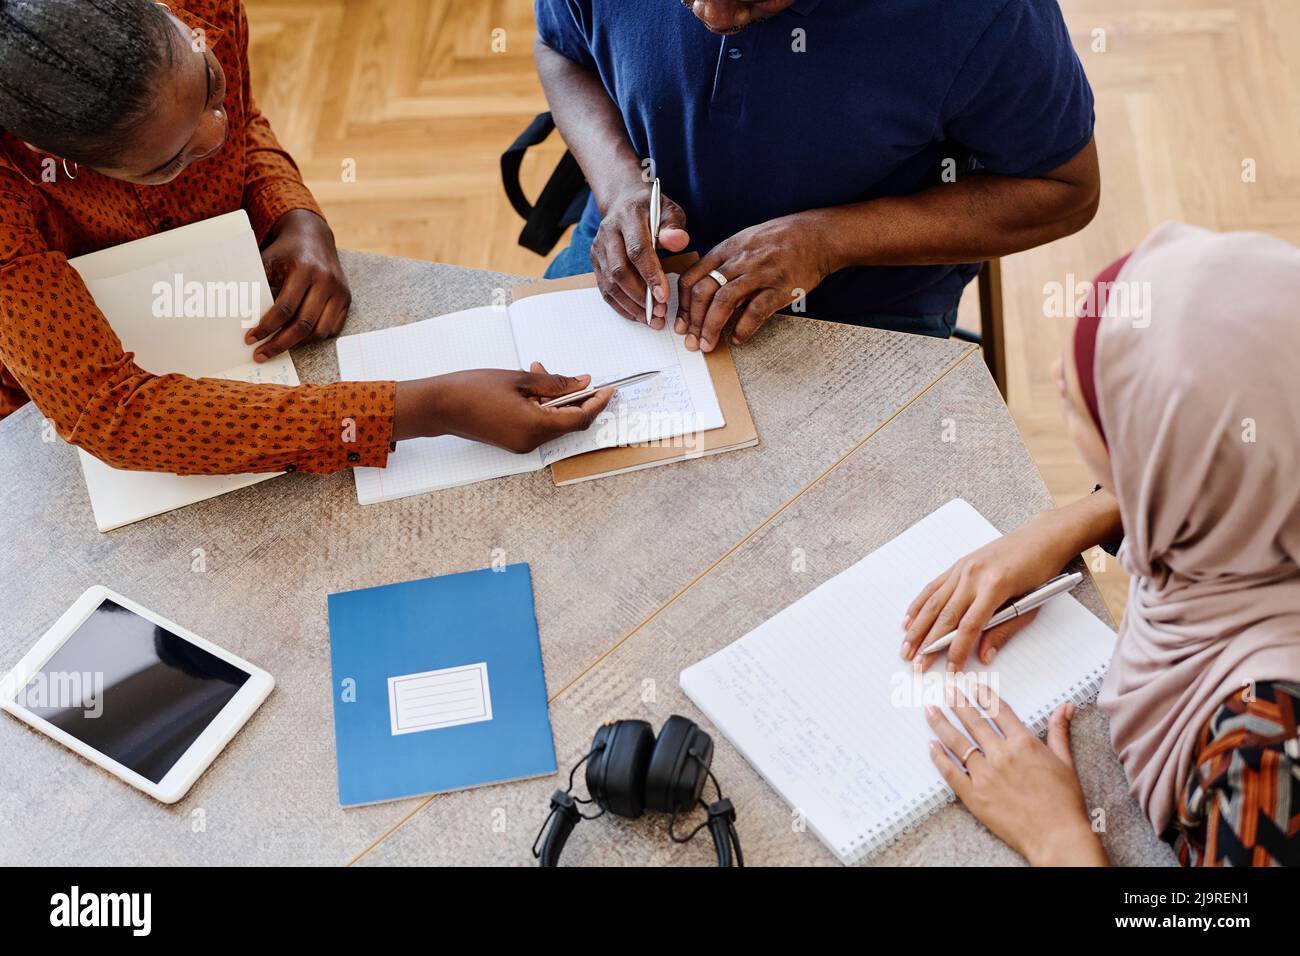 High angle view shot of two young women helping mature Black man to correct mistake during English language class for immigrants Stock Photo